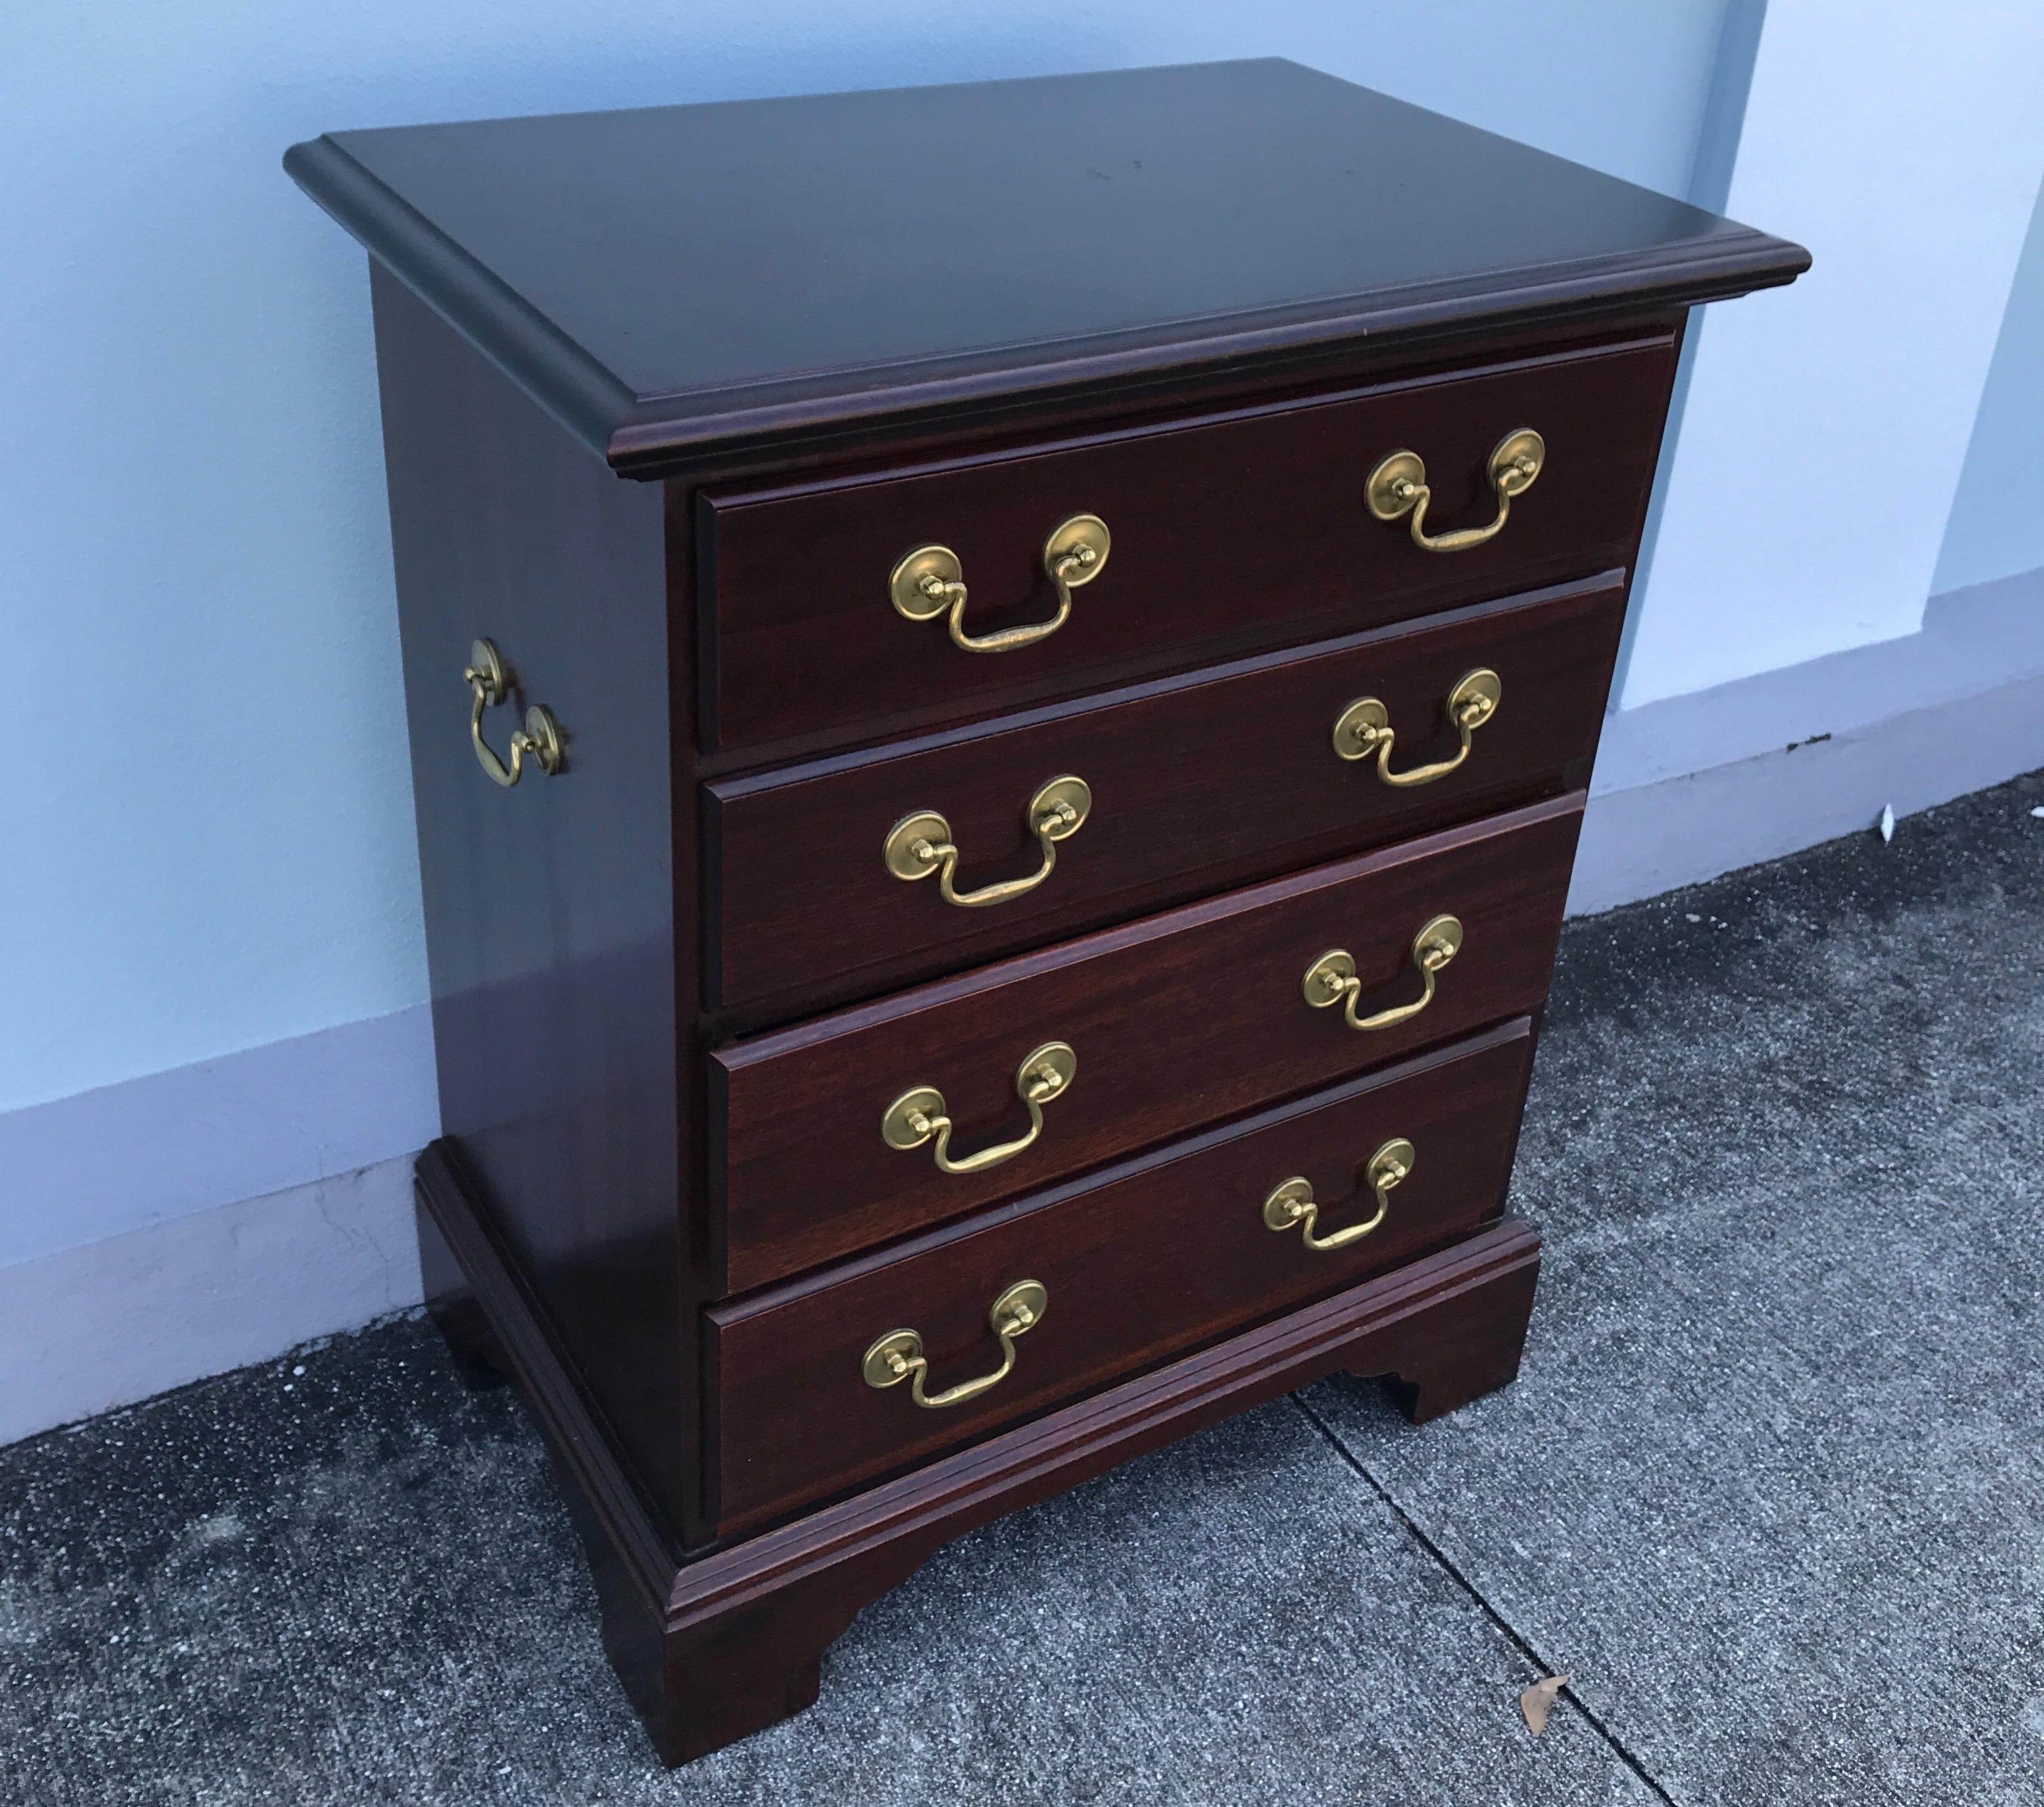 Small four-drawer chest with brass pulls. Great for a side table or nightstand.